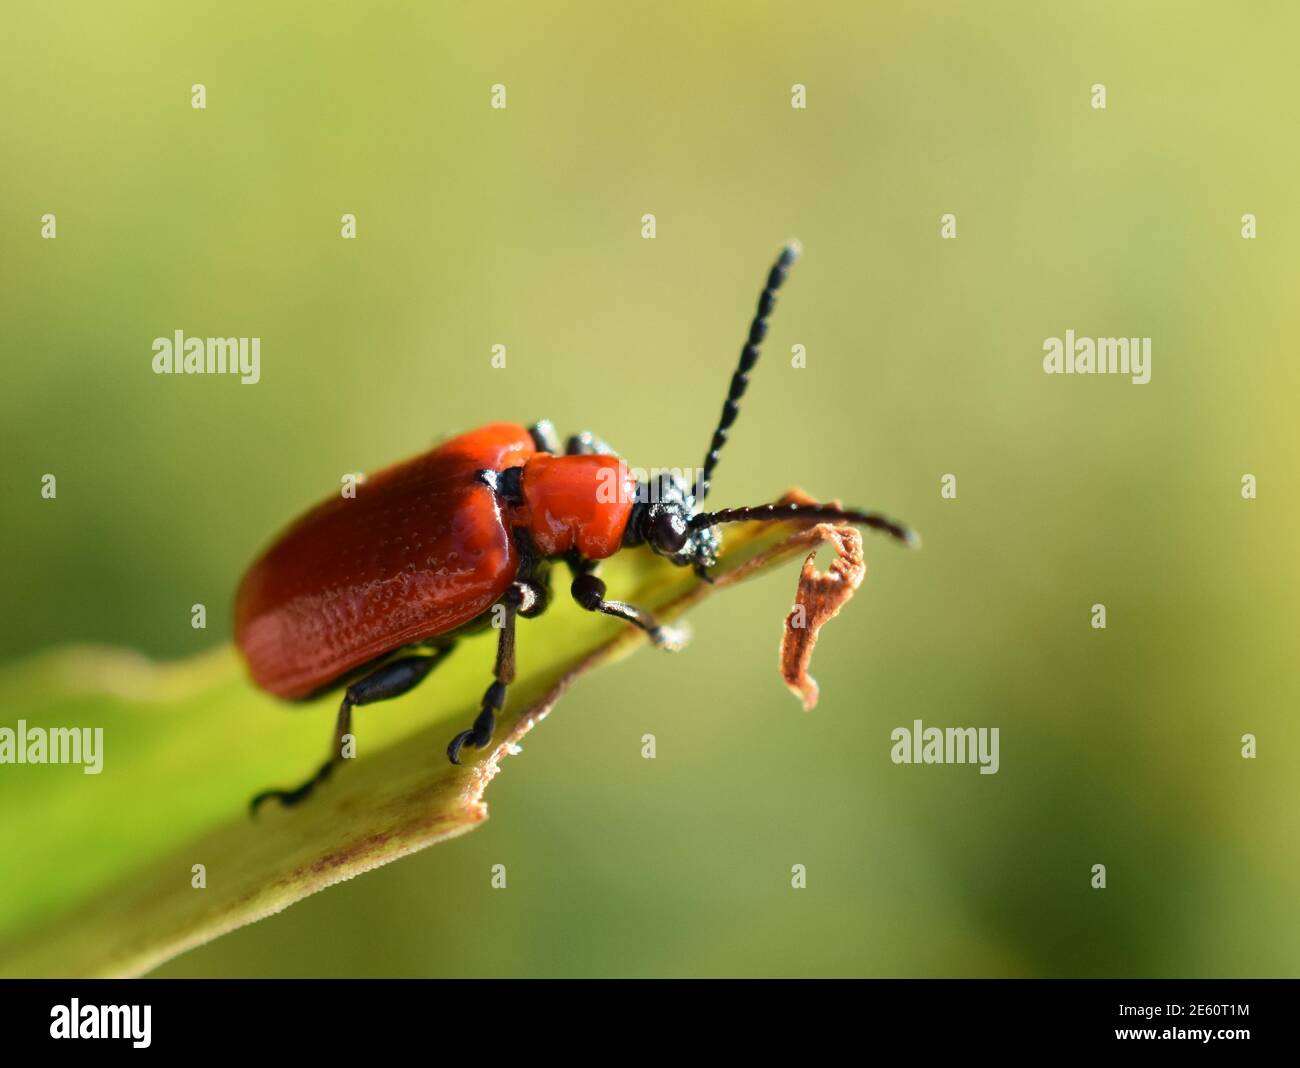 Red lily beetle garden pest insect Lilioceris lilii on a leaf Stock Photo